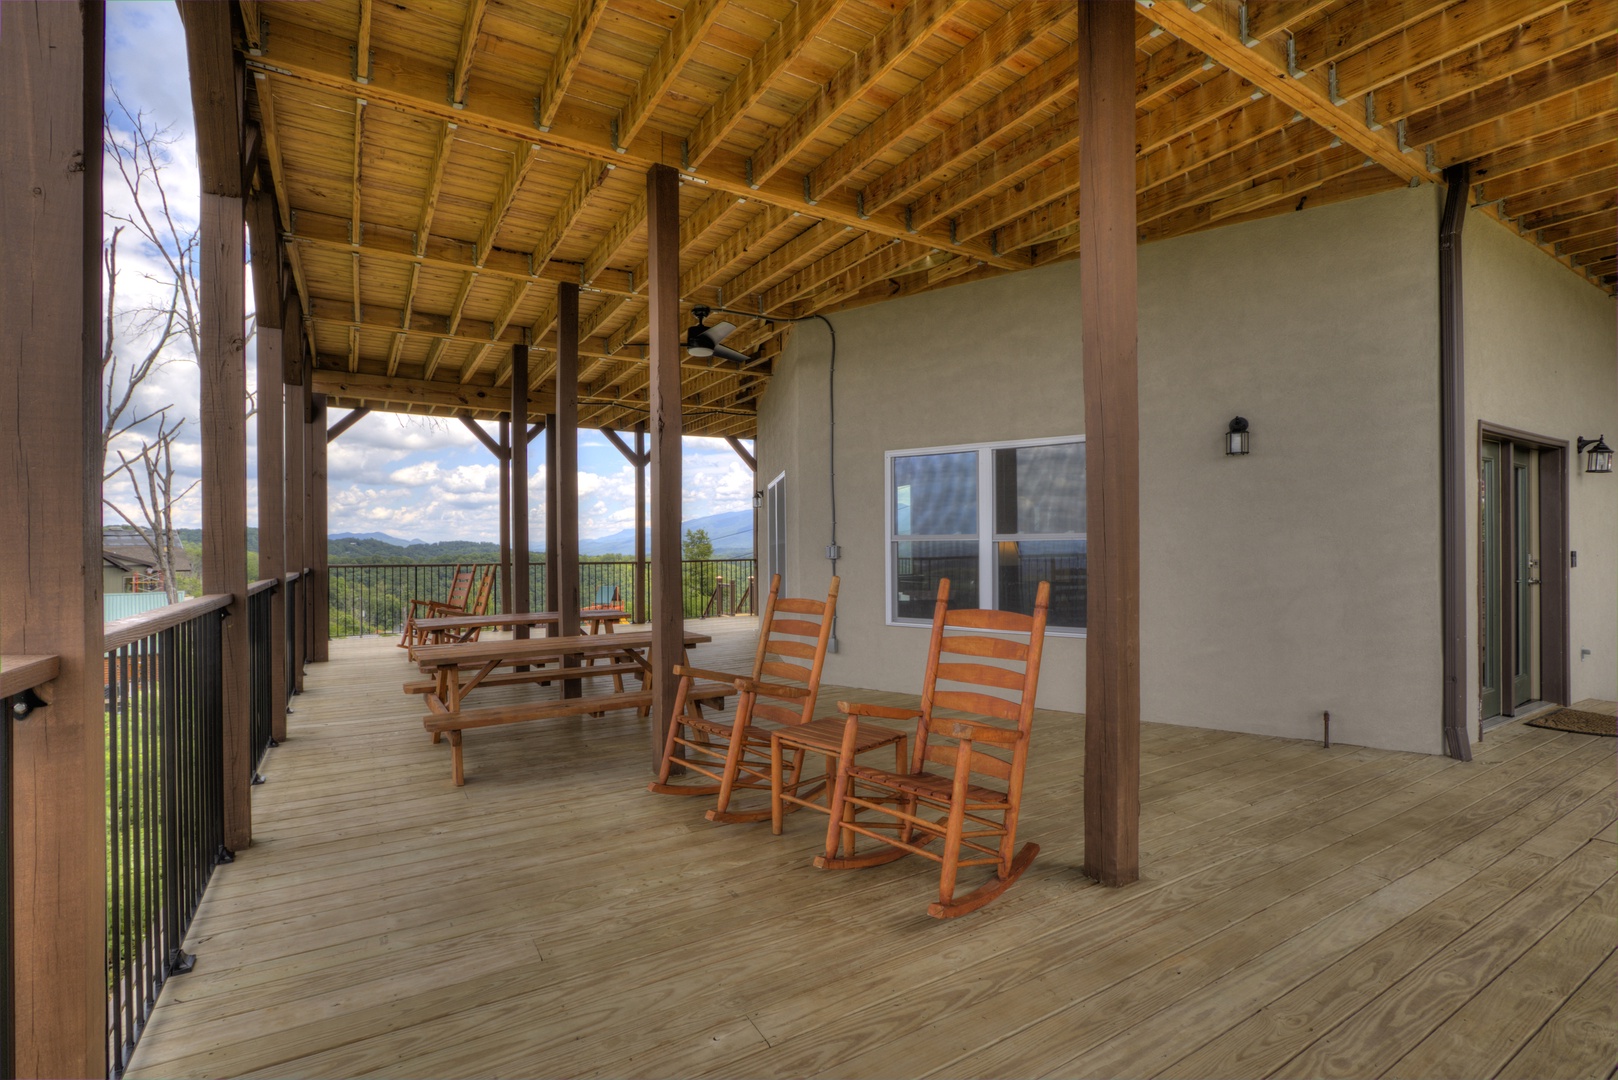 Rocking chairs and picnic table on covered deck at The Best View Lodge, a 5 bedroom cabin rental located in gatlinburg